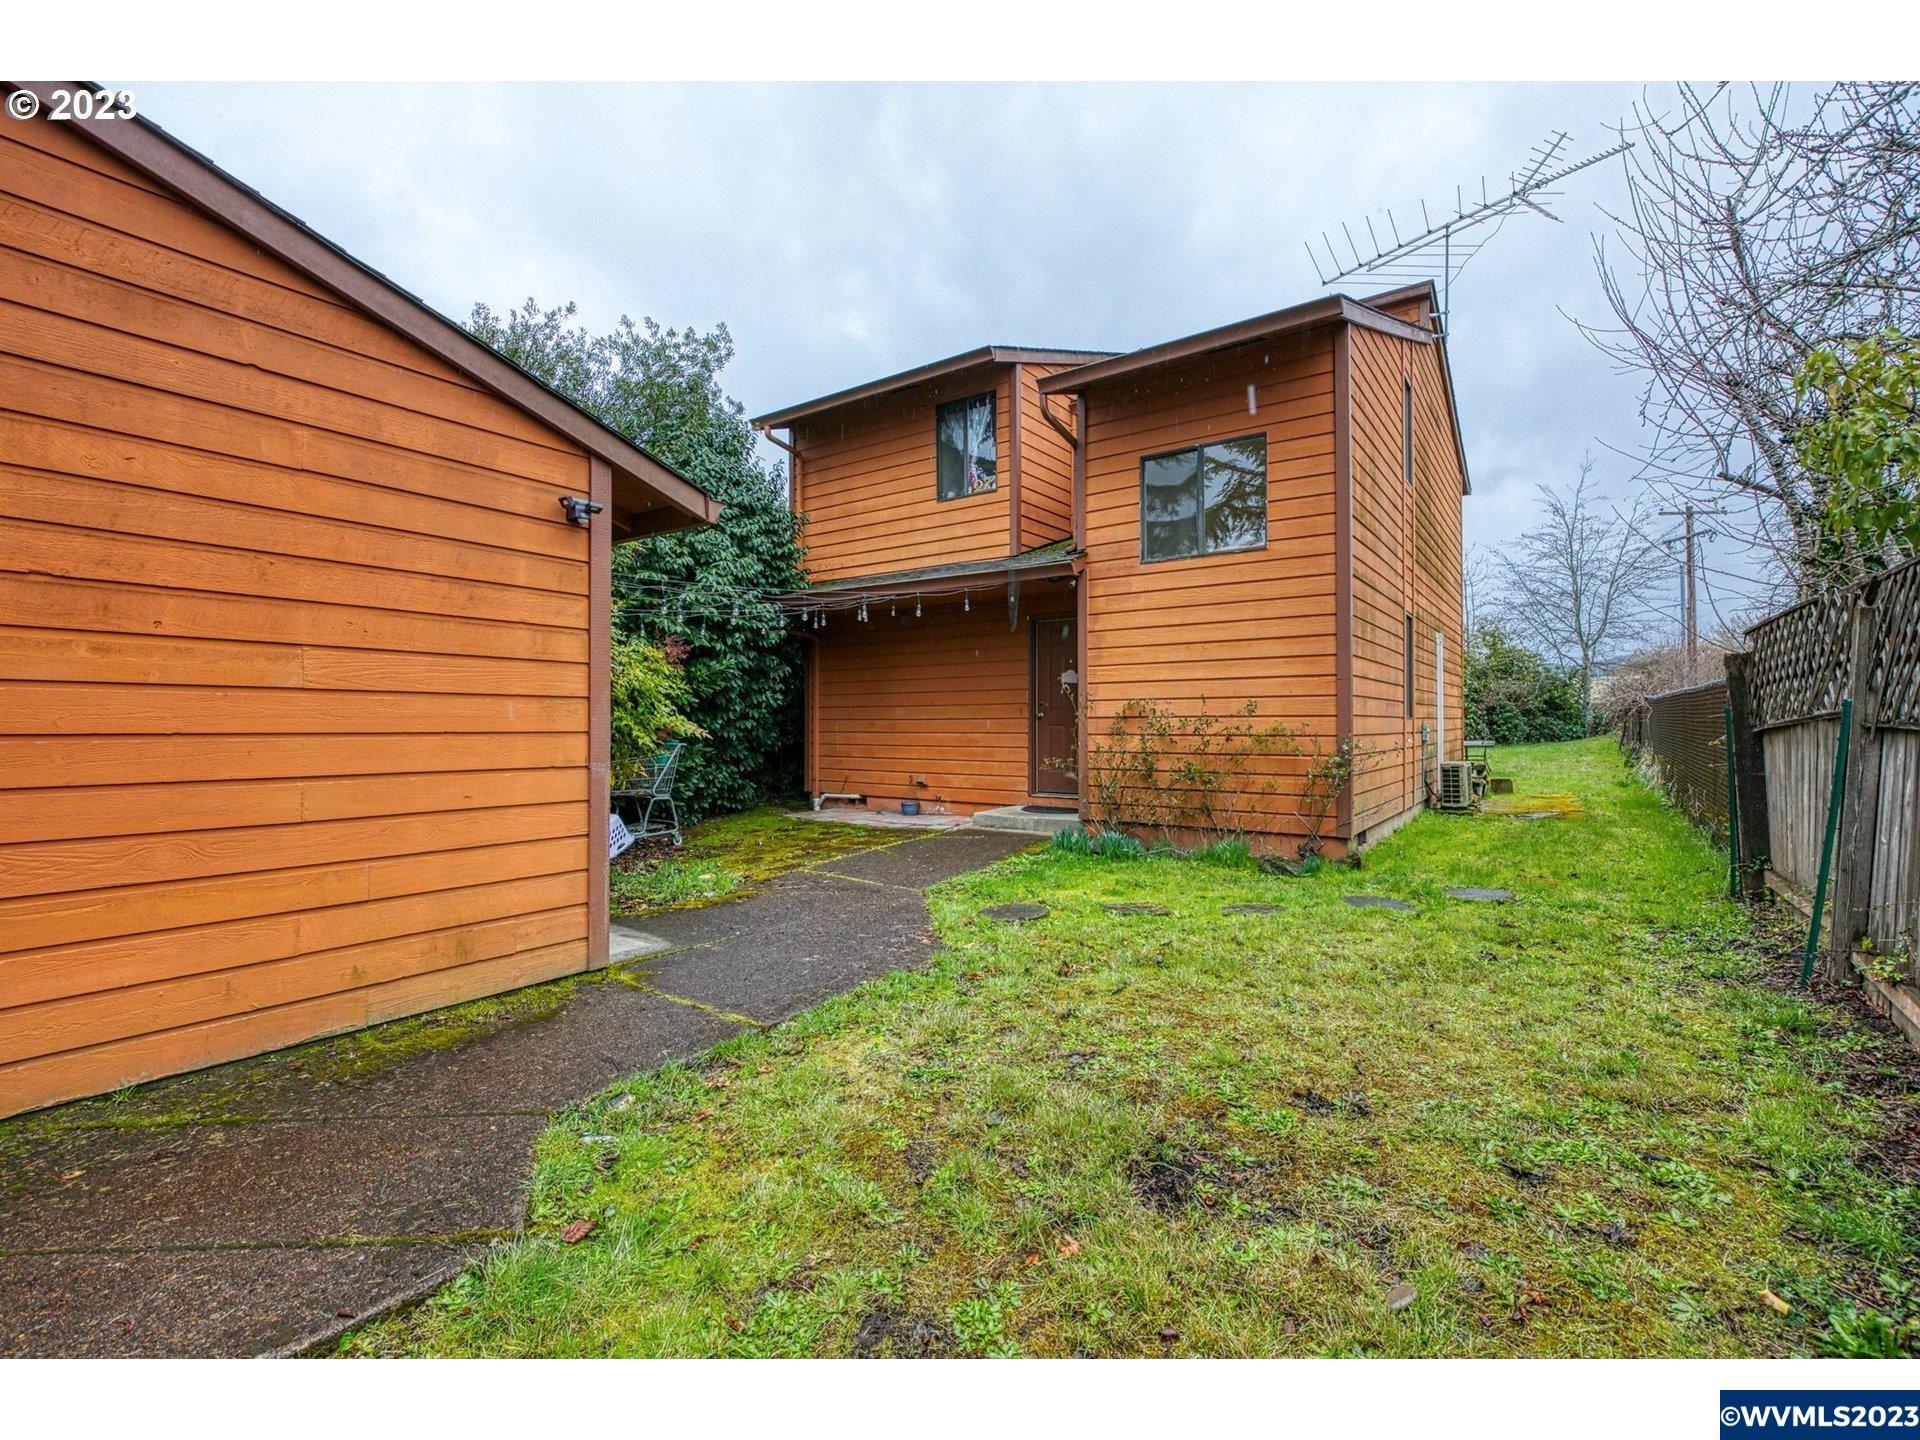 1807 NW Grant St, Corvallis, OR 97330